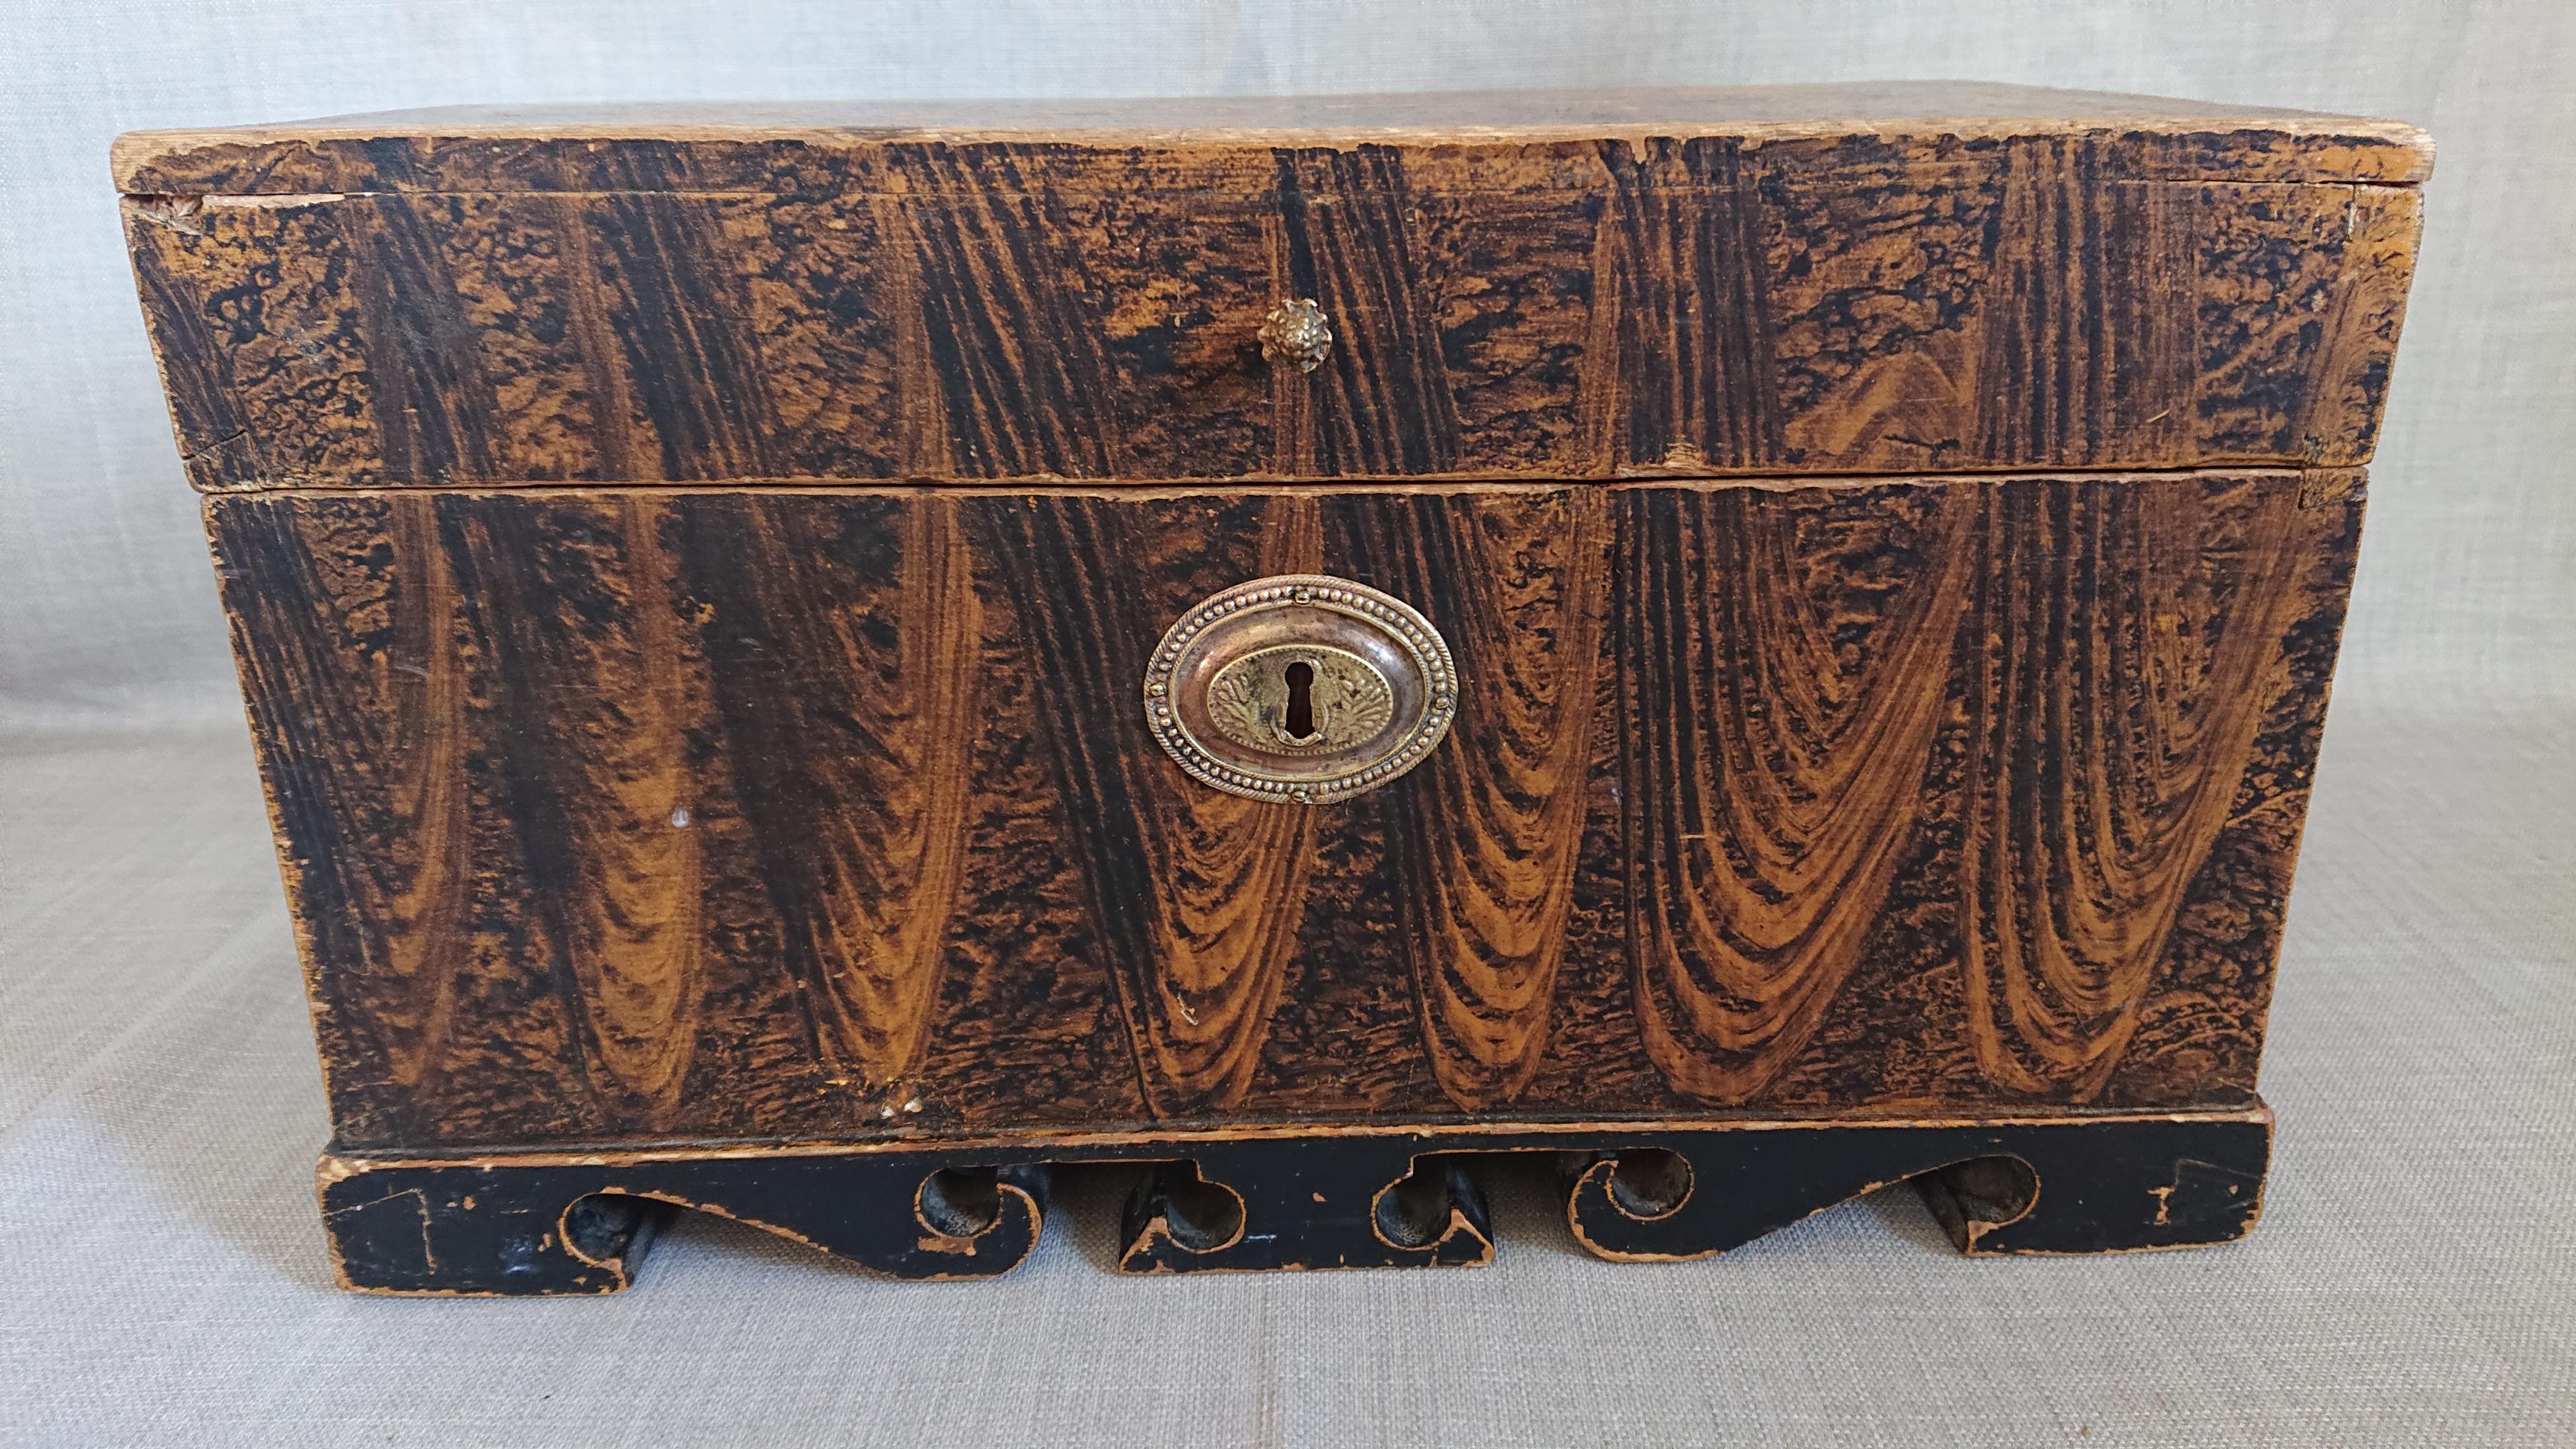 19th Century Swedish Folkart Empire Chest /box from Skelleftea Vasterbotten ,Northern Sweden.
Decorative Wood imitaition painted small chest /box with beautiful brass fittings & small brass knop.
Nicely cut bottom.
All original.
Untouched